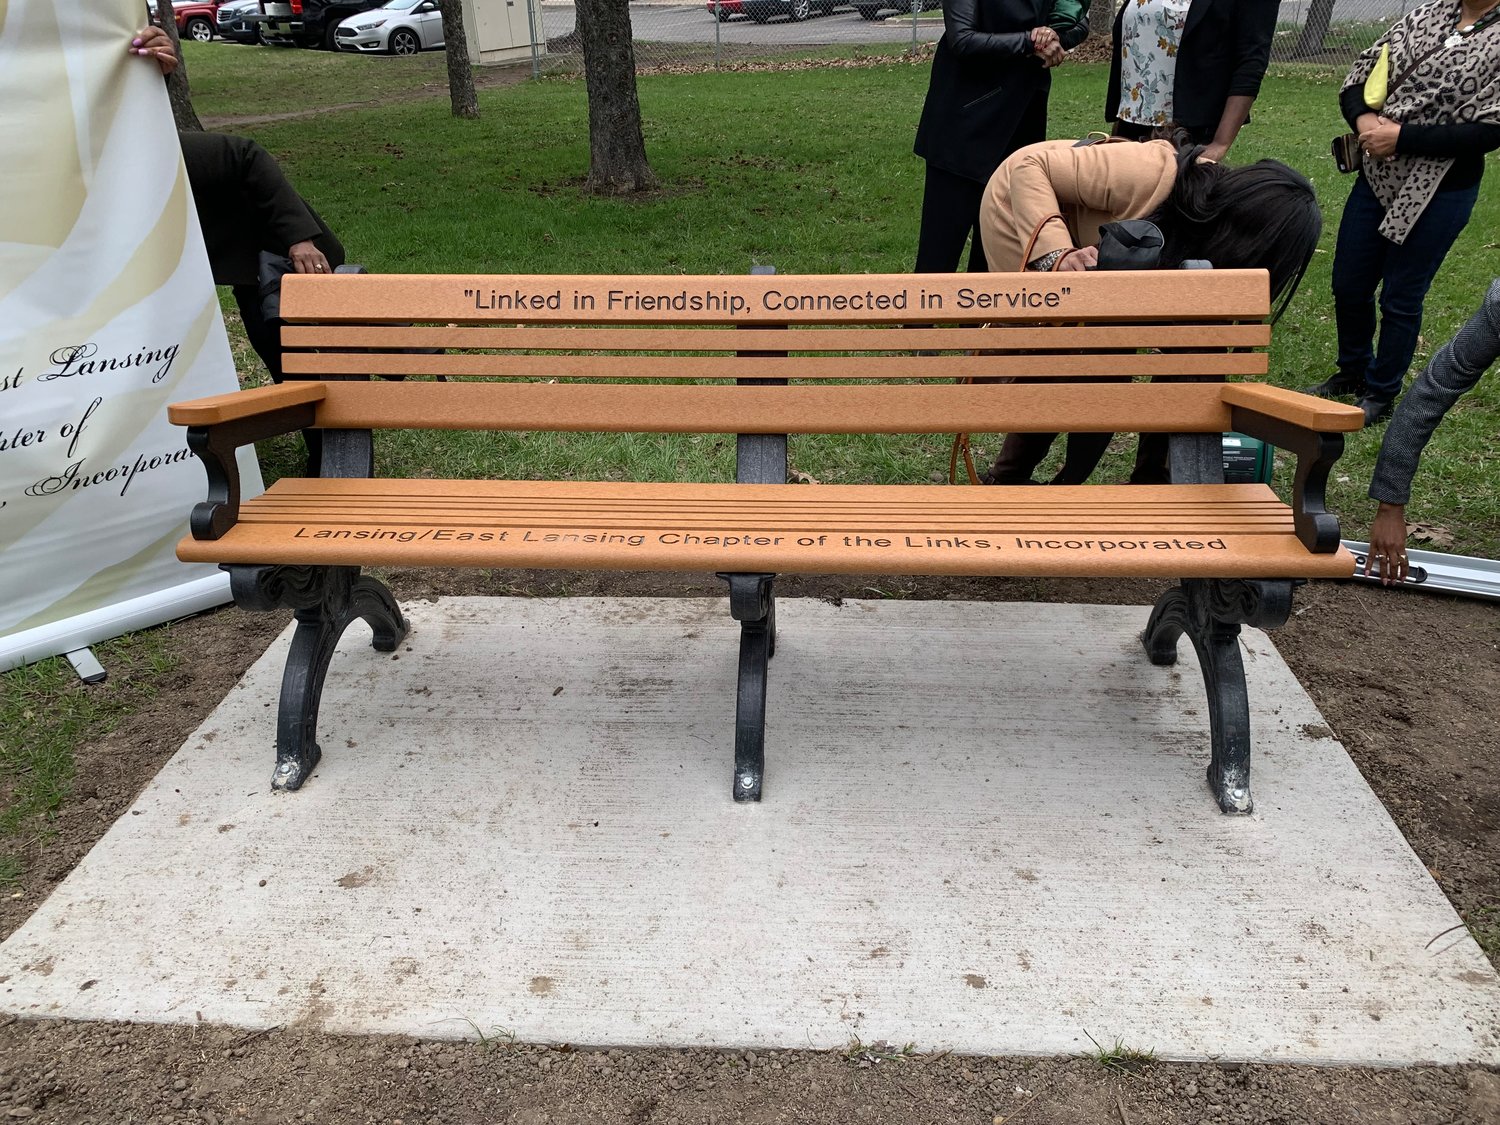 A new bench donated to the city of Lansing was "unveiled" last week.